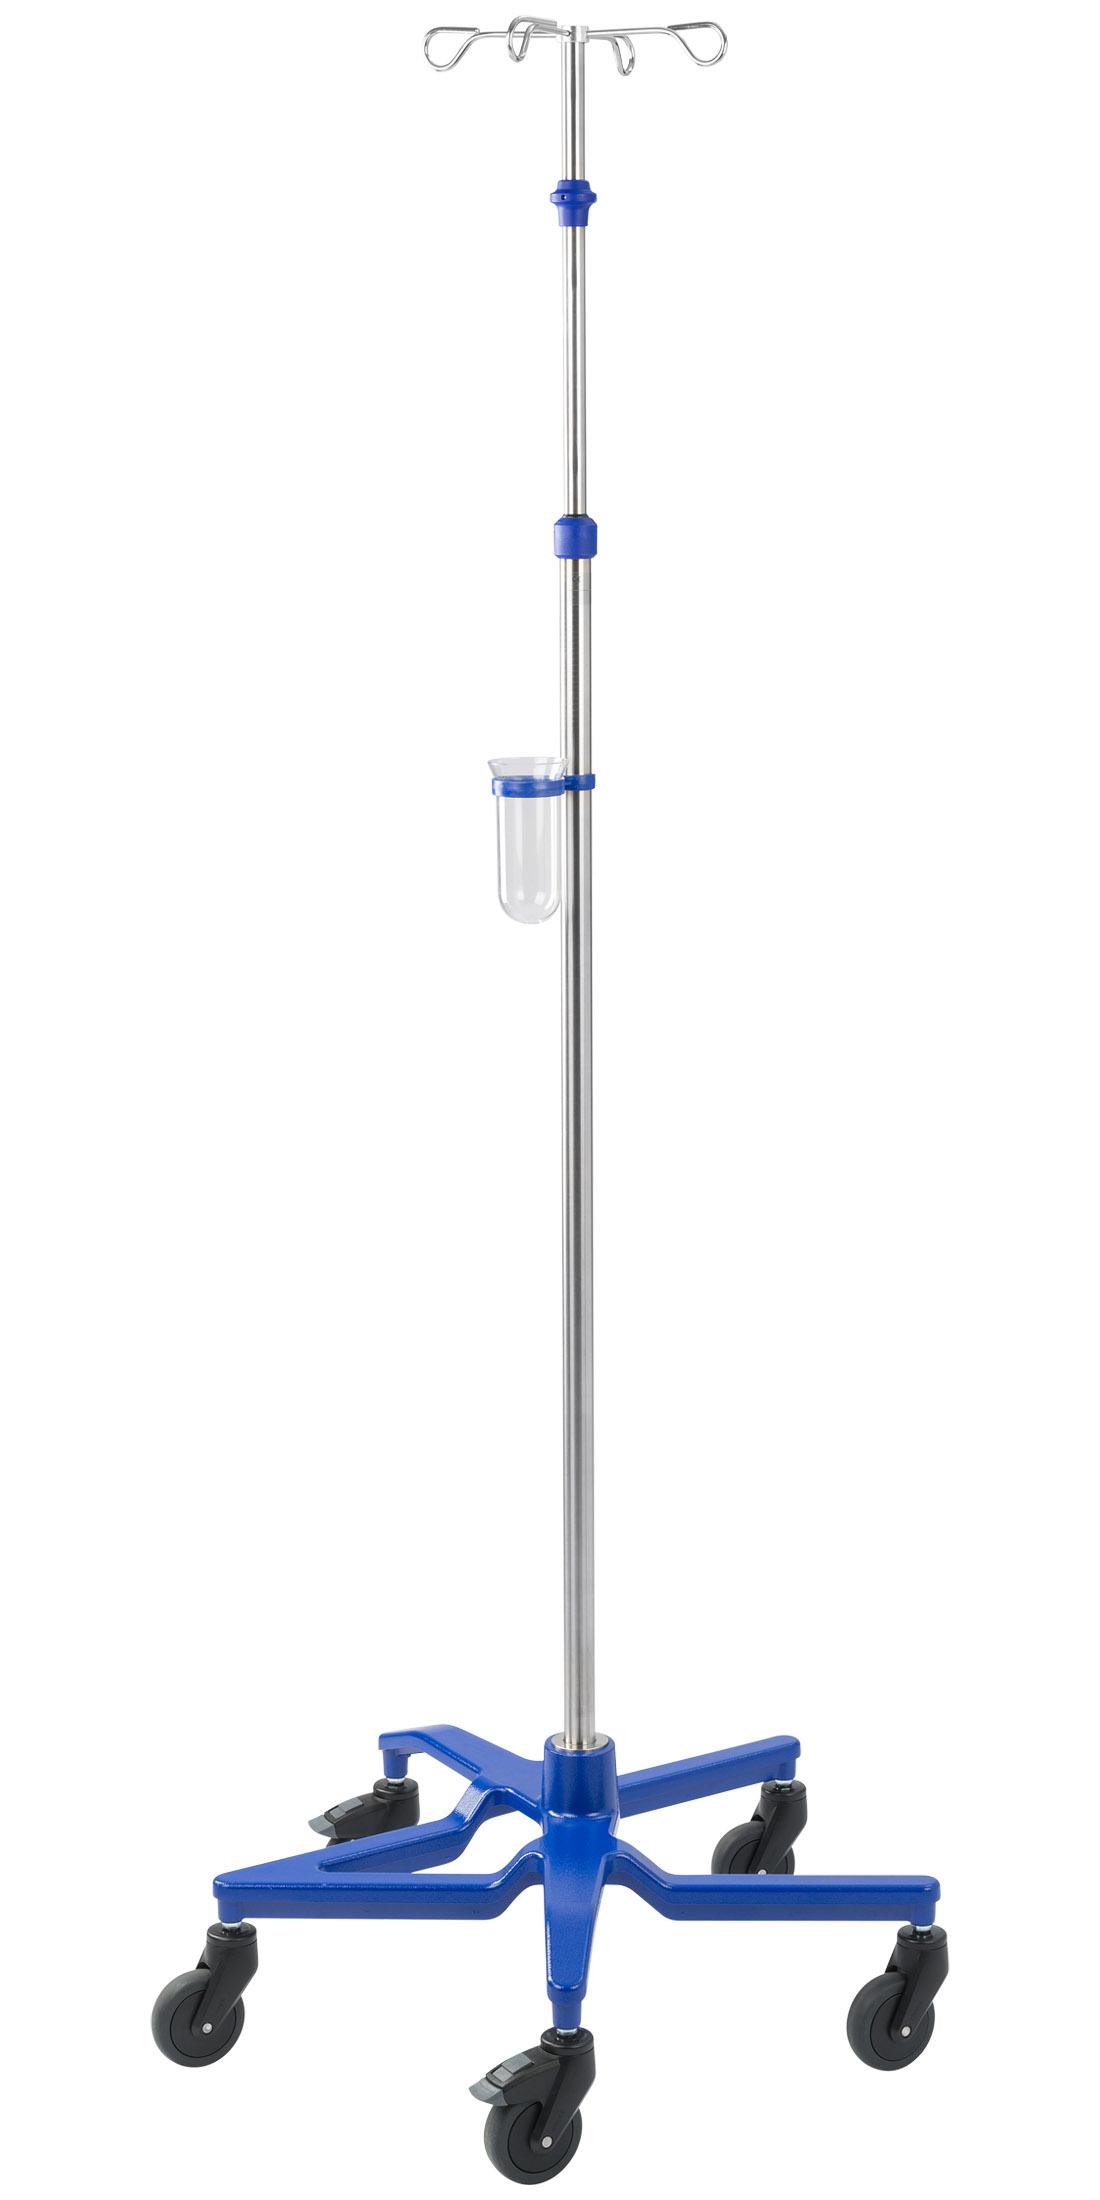 Main photo of the product with name, IV-Stand Eco-Space single handed